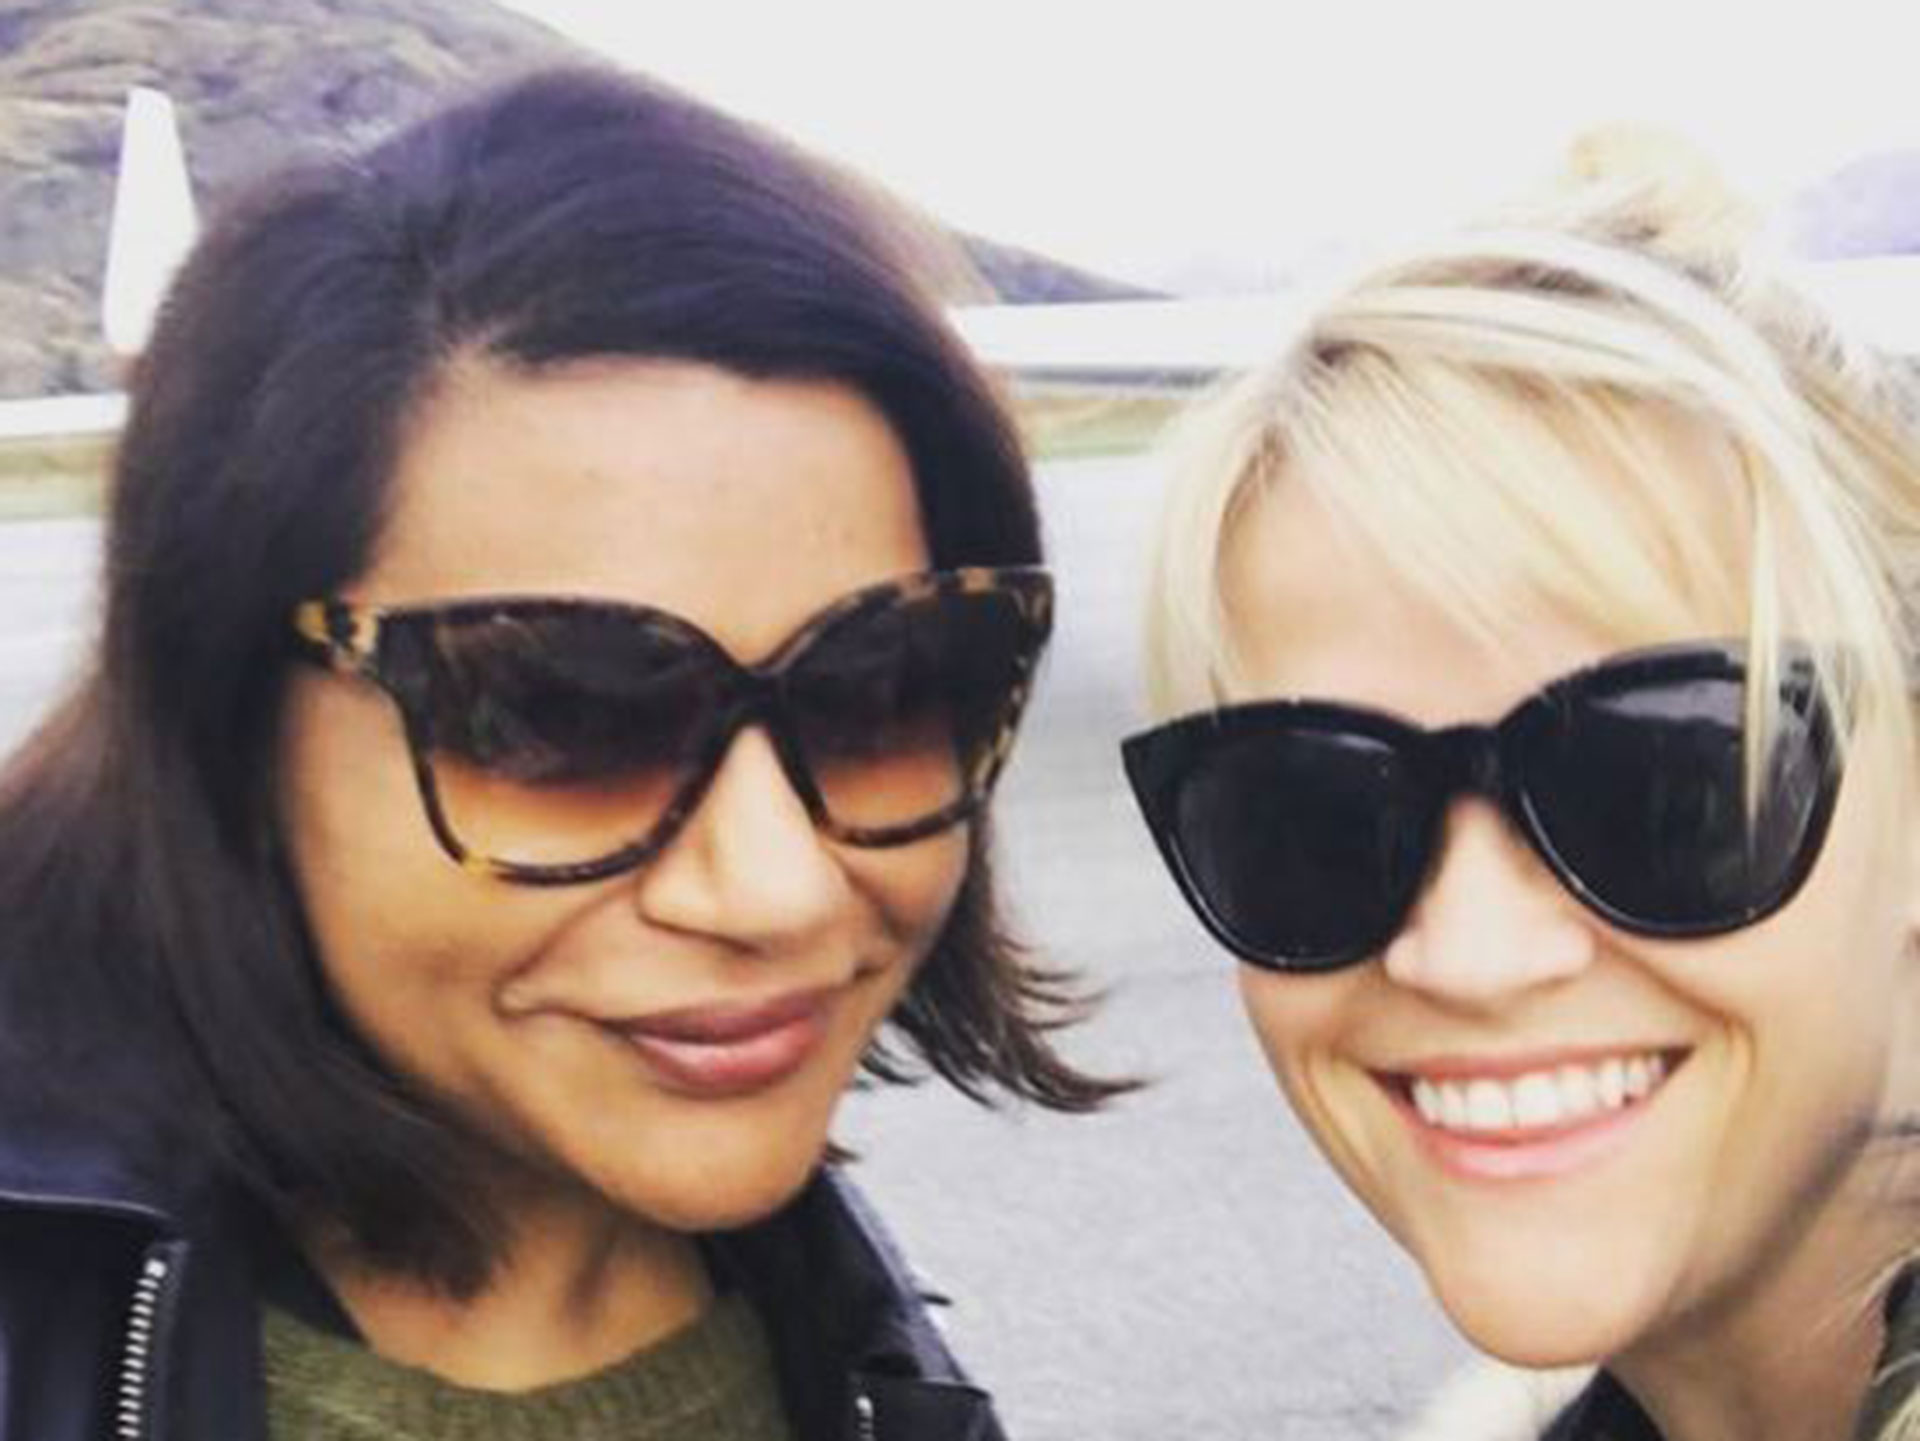 Reese Witherspoon and Mindy Kaling in New Zealand